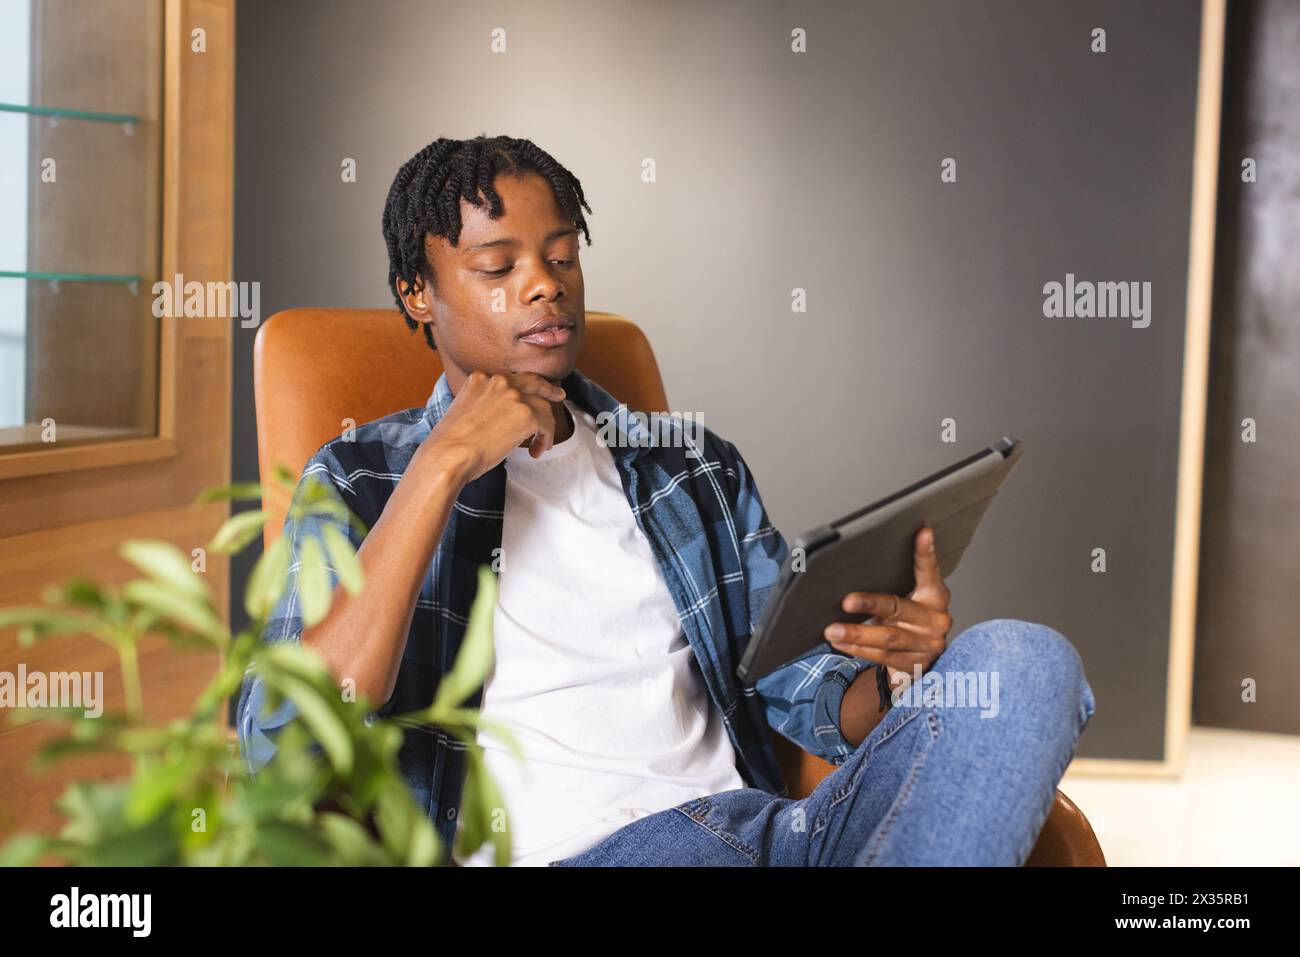 African American man holding tablet, sitting in chair, looking thoughtful in a modern business offic Stock Photo